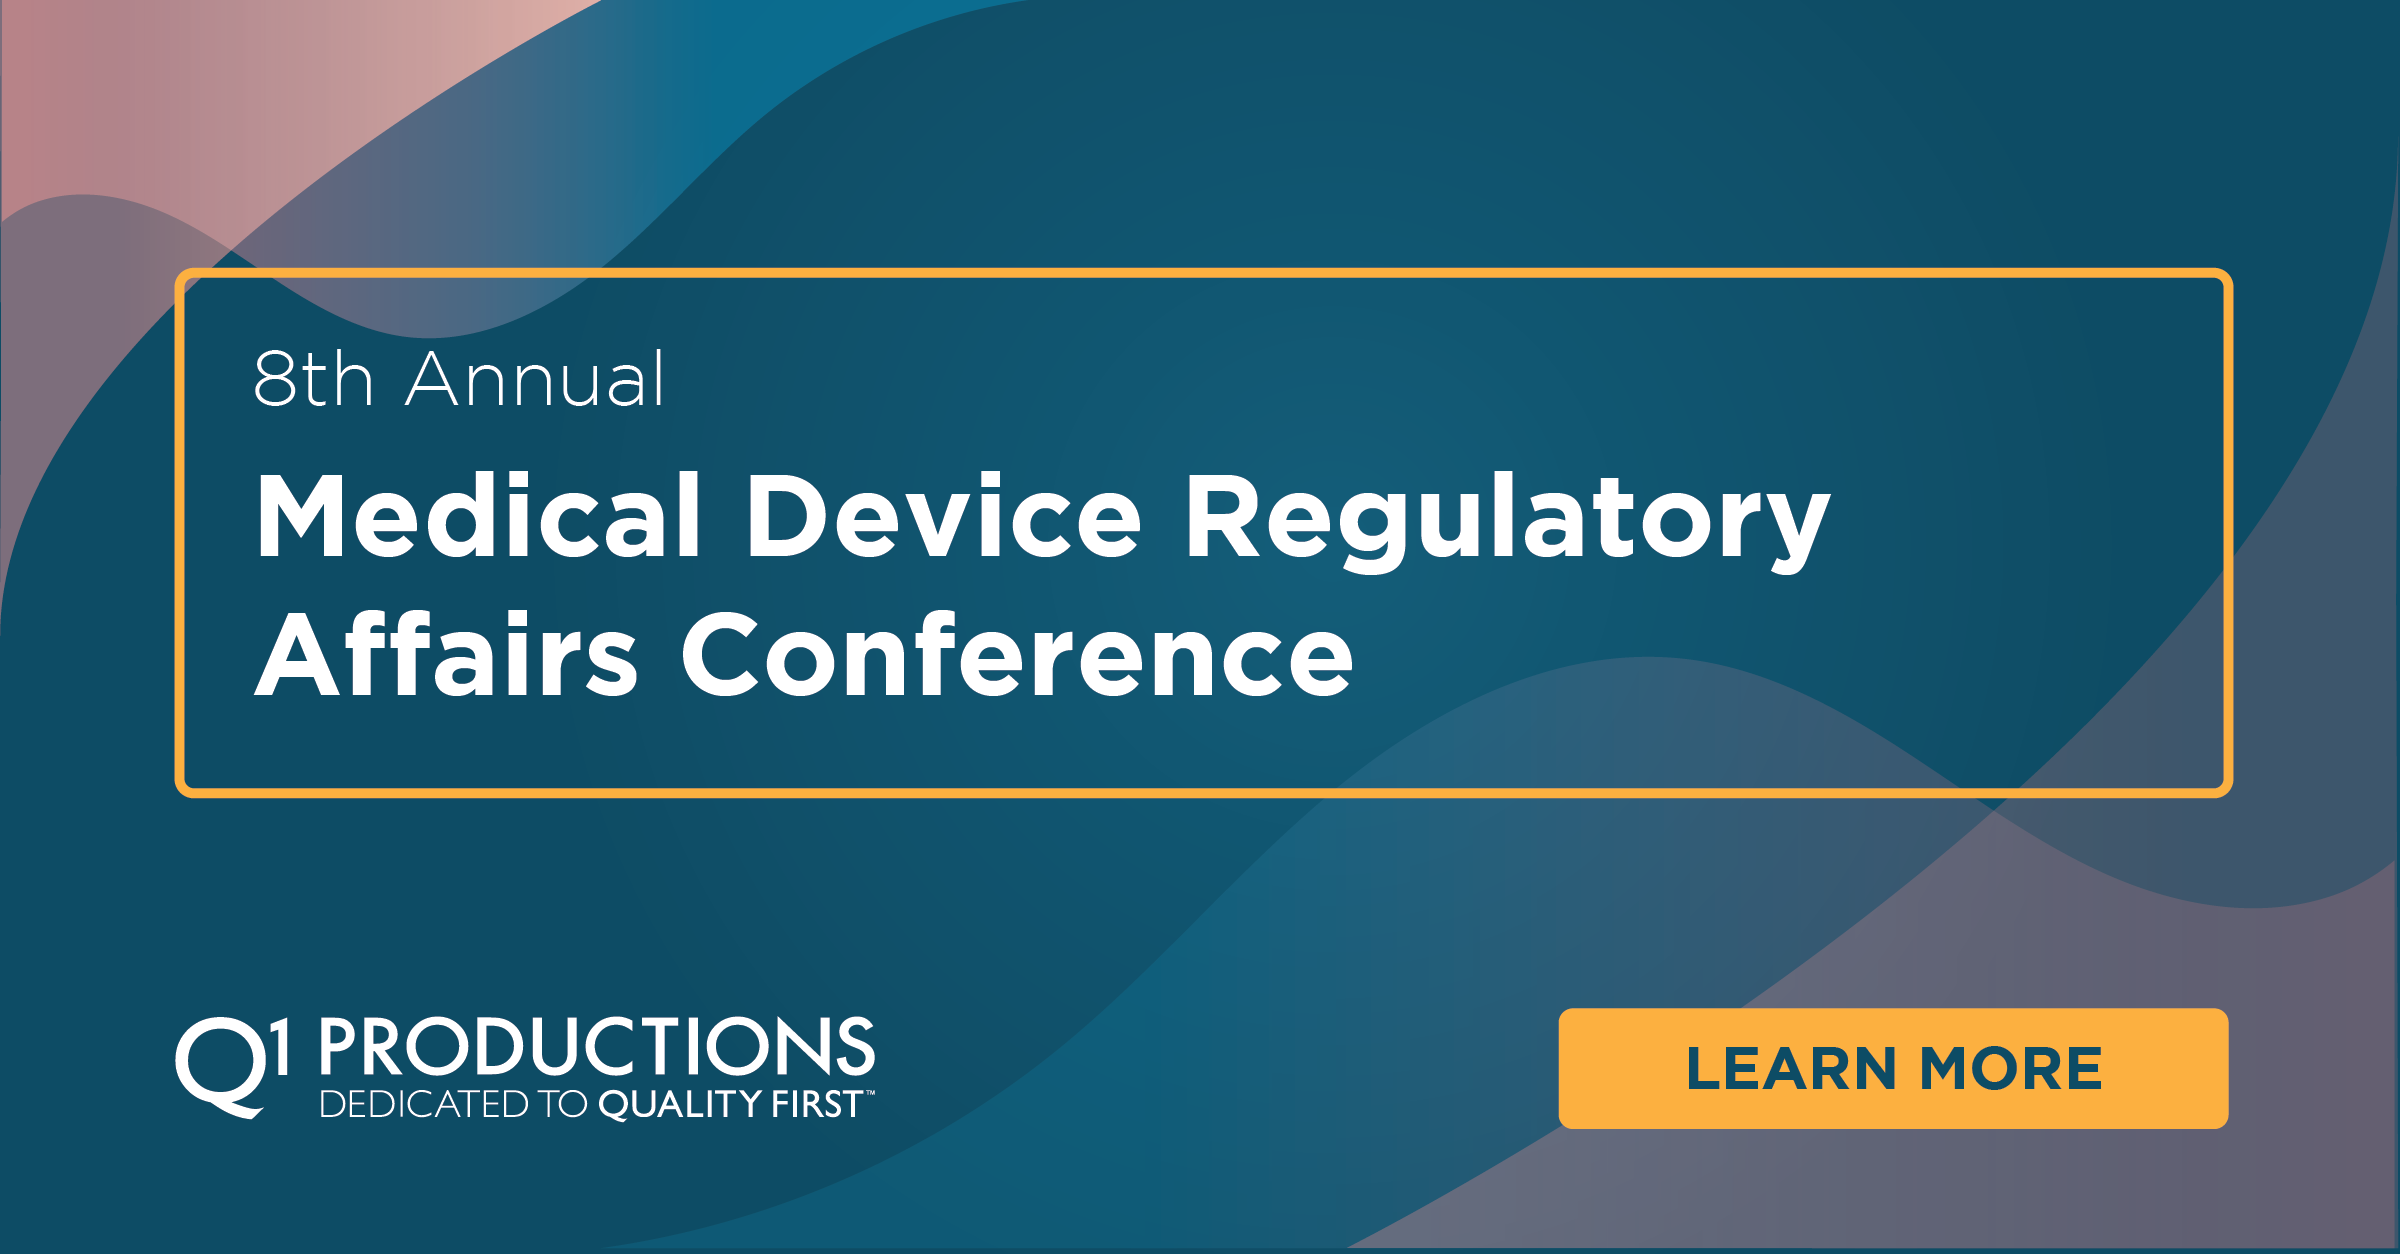 8th Annual Medical Device Regulatory Affairs Conference Q1 Productions